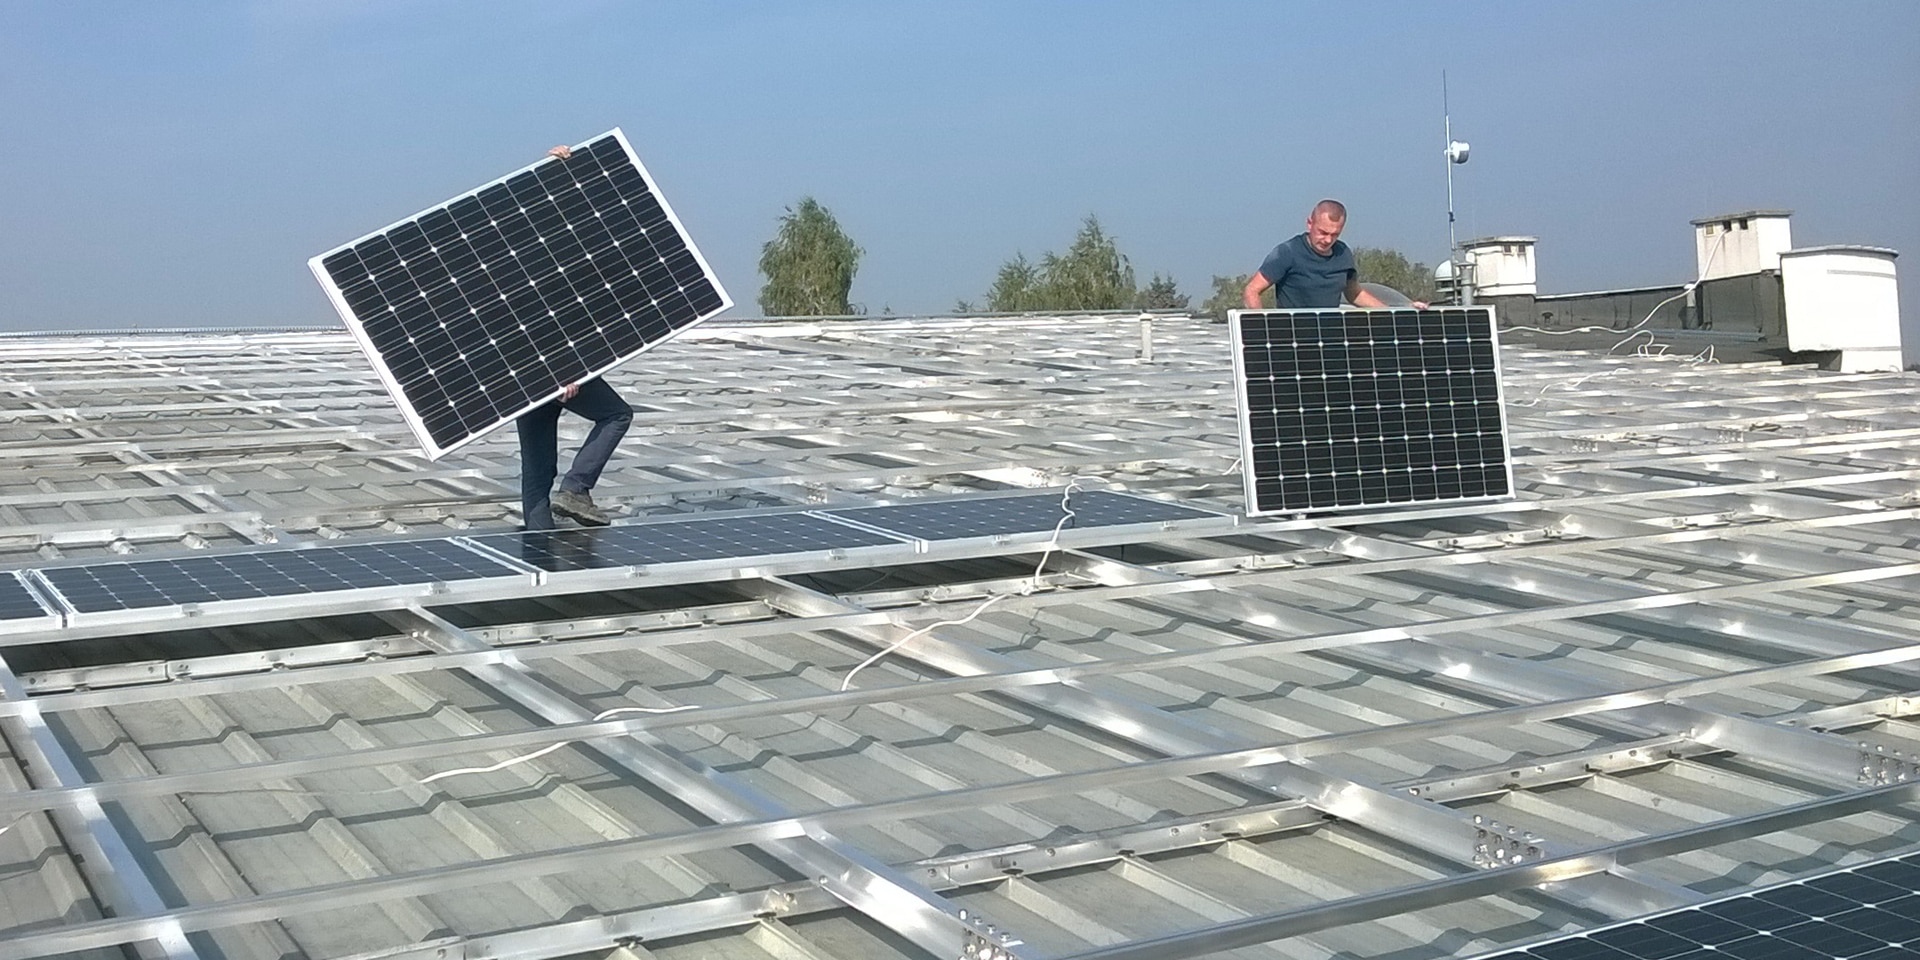 Two technicians install solar panels on the roof of a public building.